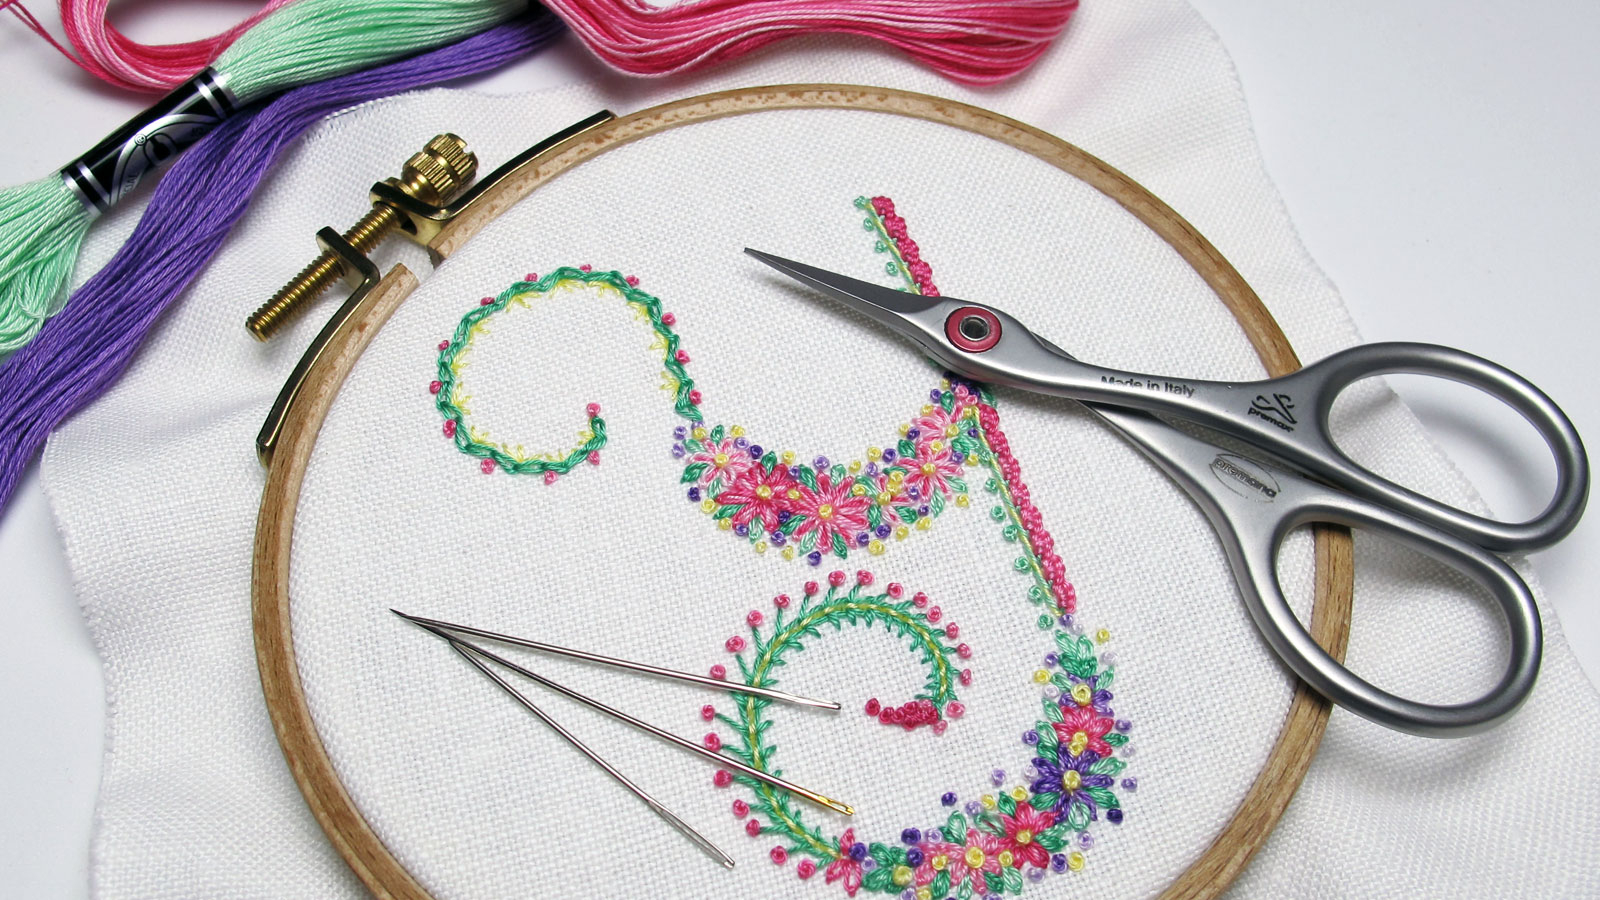 How To Make Embroidery Patterns Needlenthread Tips Tricks And Great Resources For Hand Embroidery